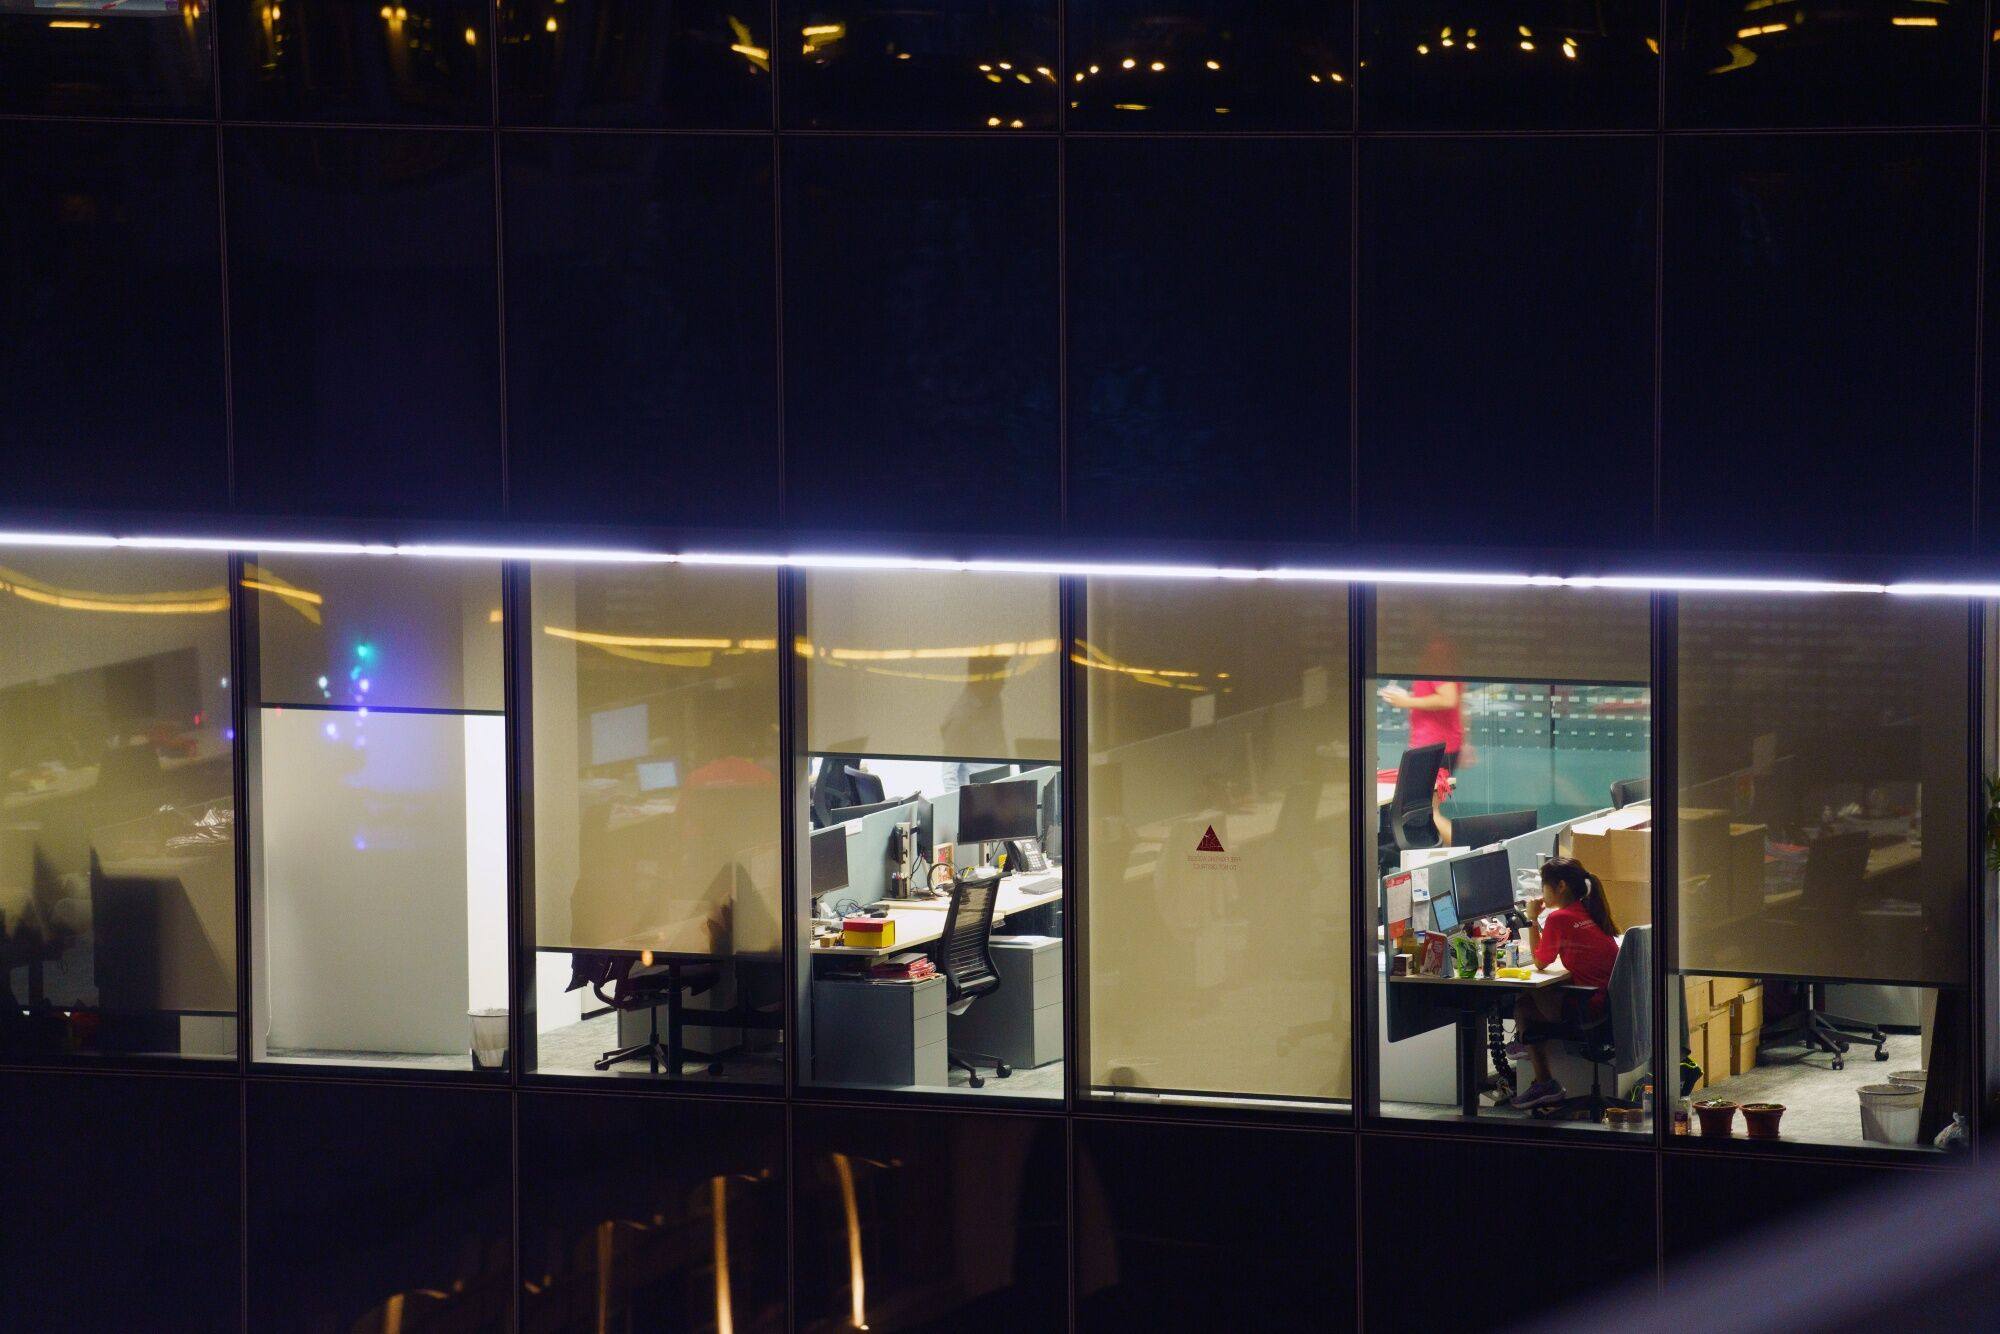 Office workers are seen at night through the windows of a commercial building in the central business district of Singapore earlier this month. The city state’s flexitime move is in line with other countries including Ireland and Britain. Photo: Bloomberg